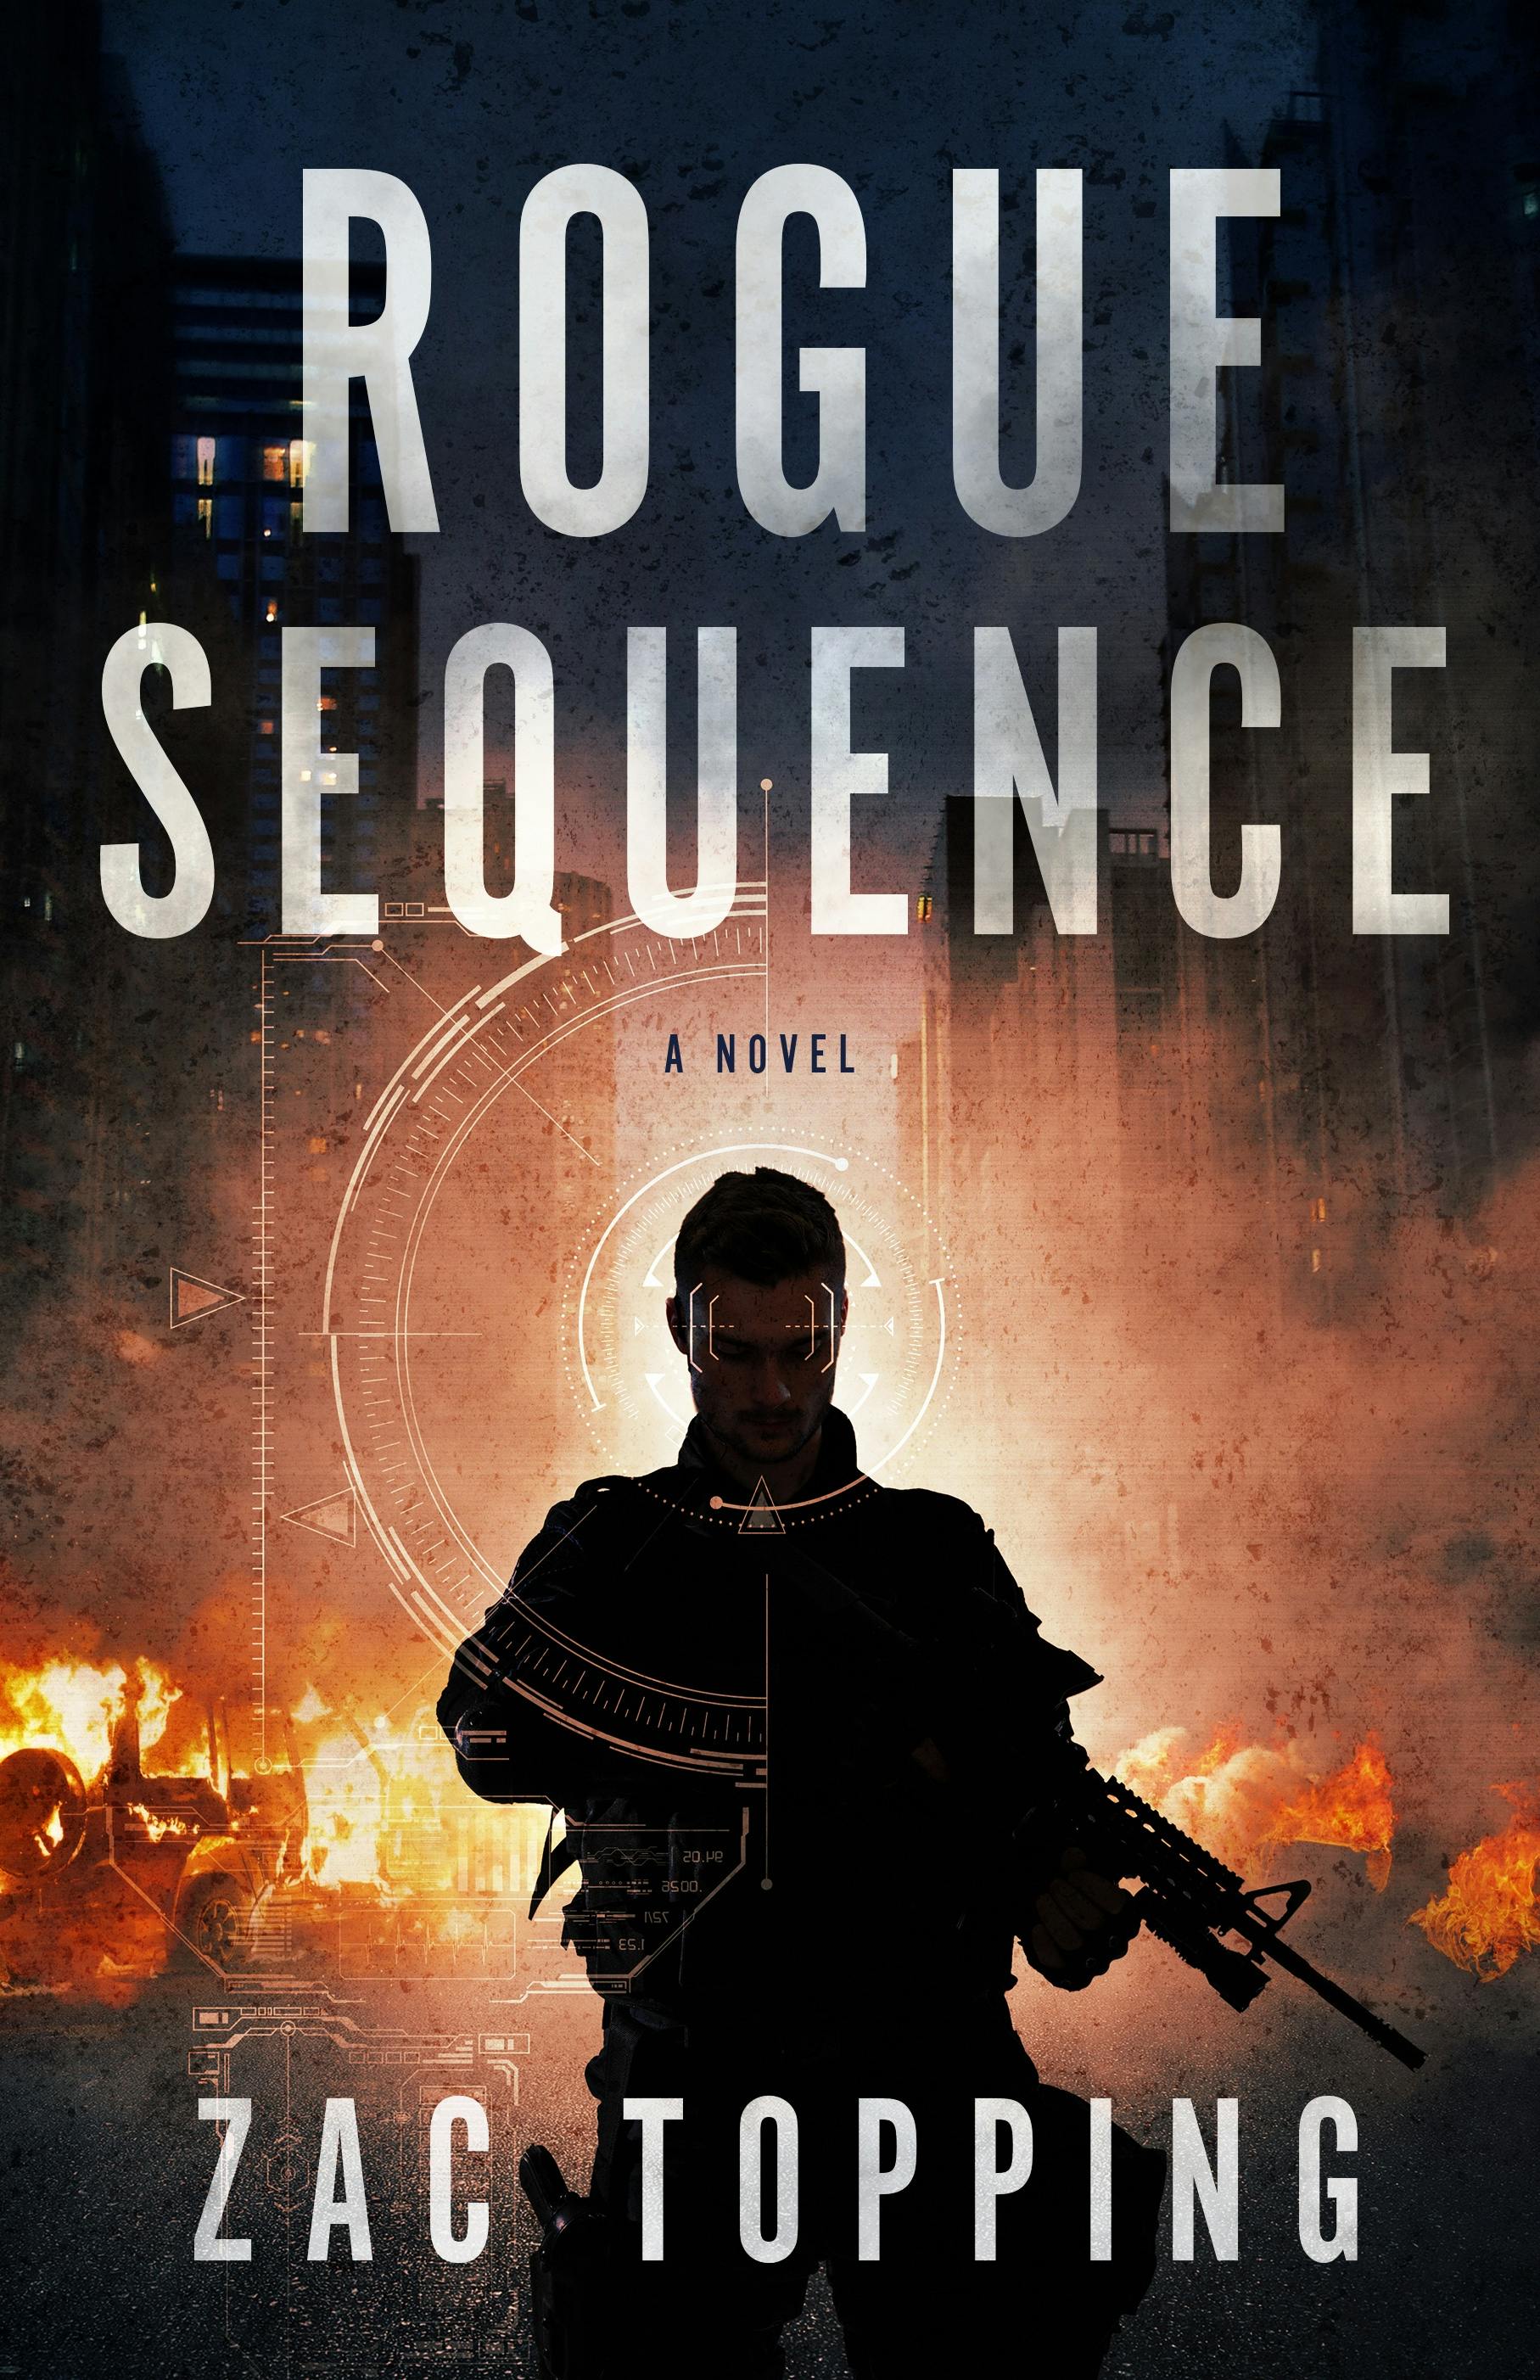 Cover for the book titled as: Rogue Sequence